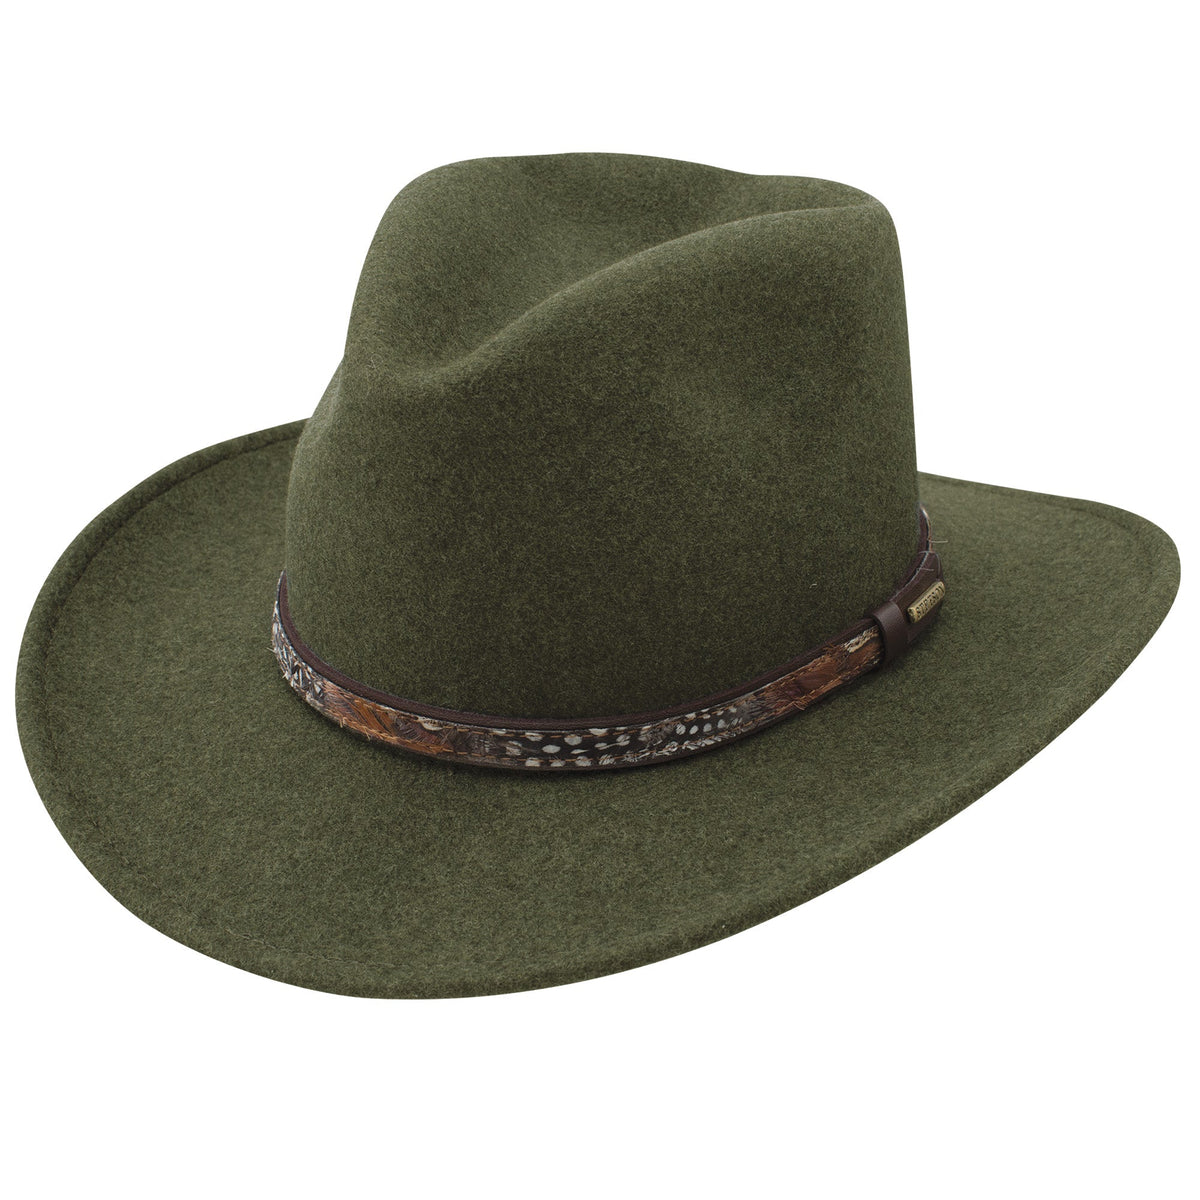 Stetson Expedition Loden Crushable Cactus Ropes Mexico